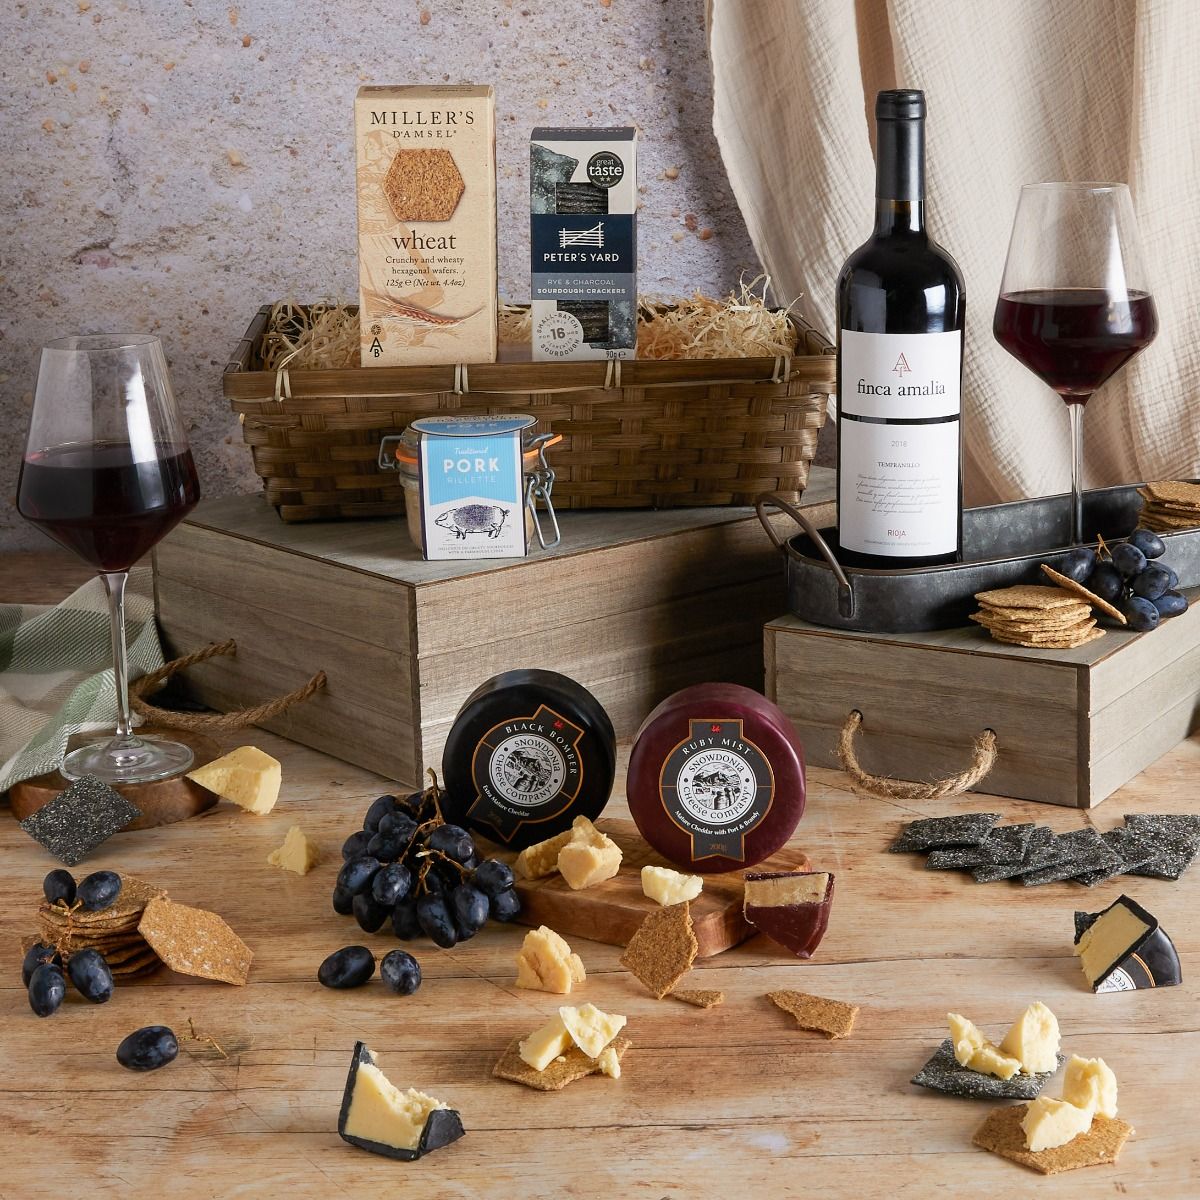 Wine, Cheese & Rillette Hamper with contents on display